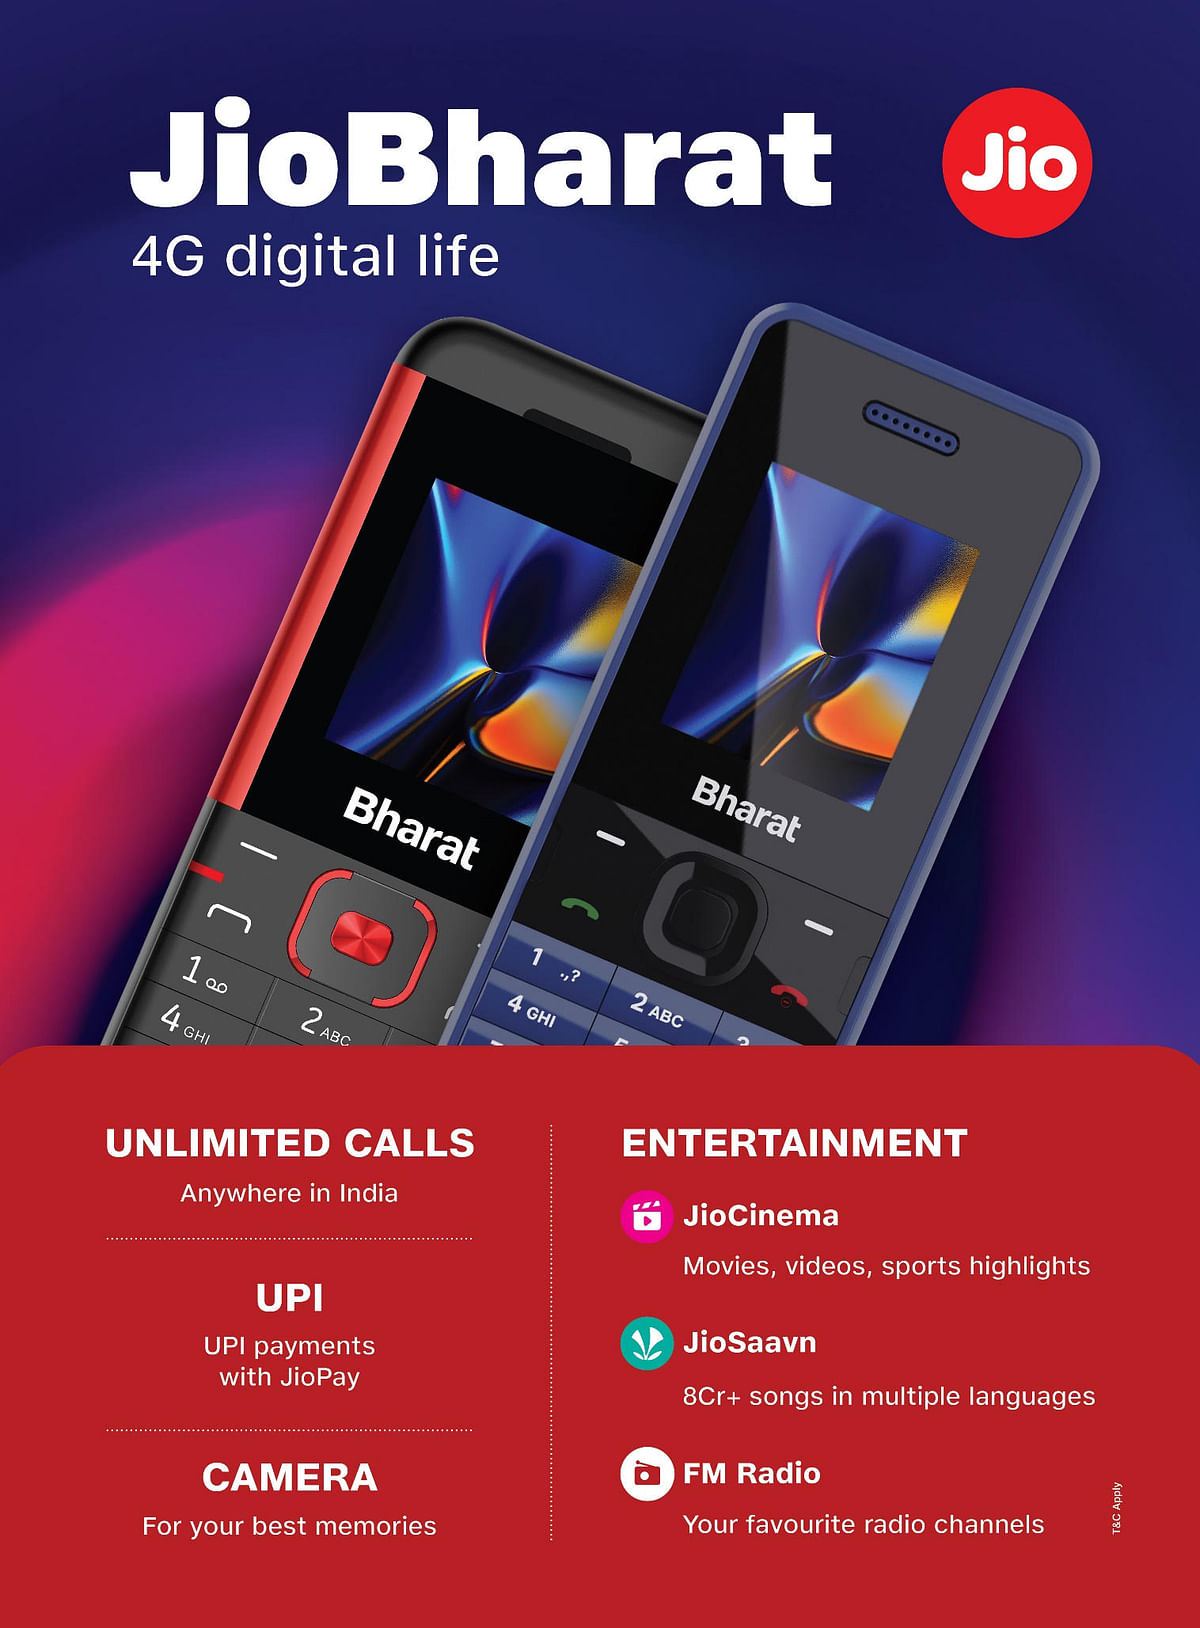 Jio launches a 4G-enabled smartphone for Rs 999